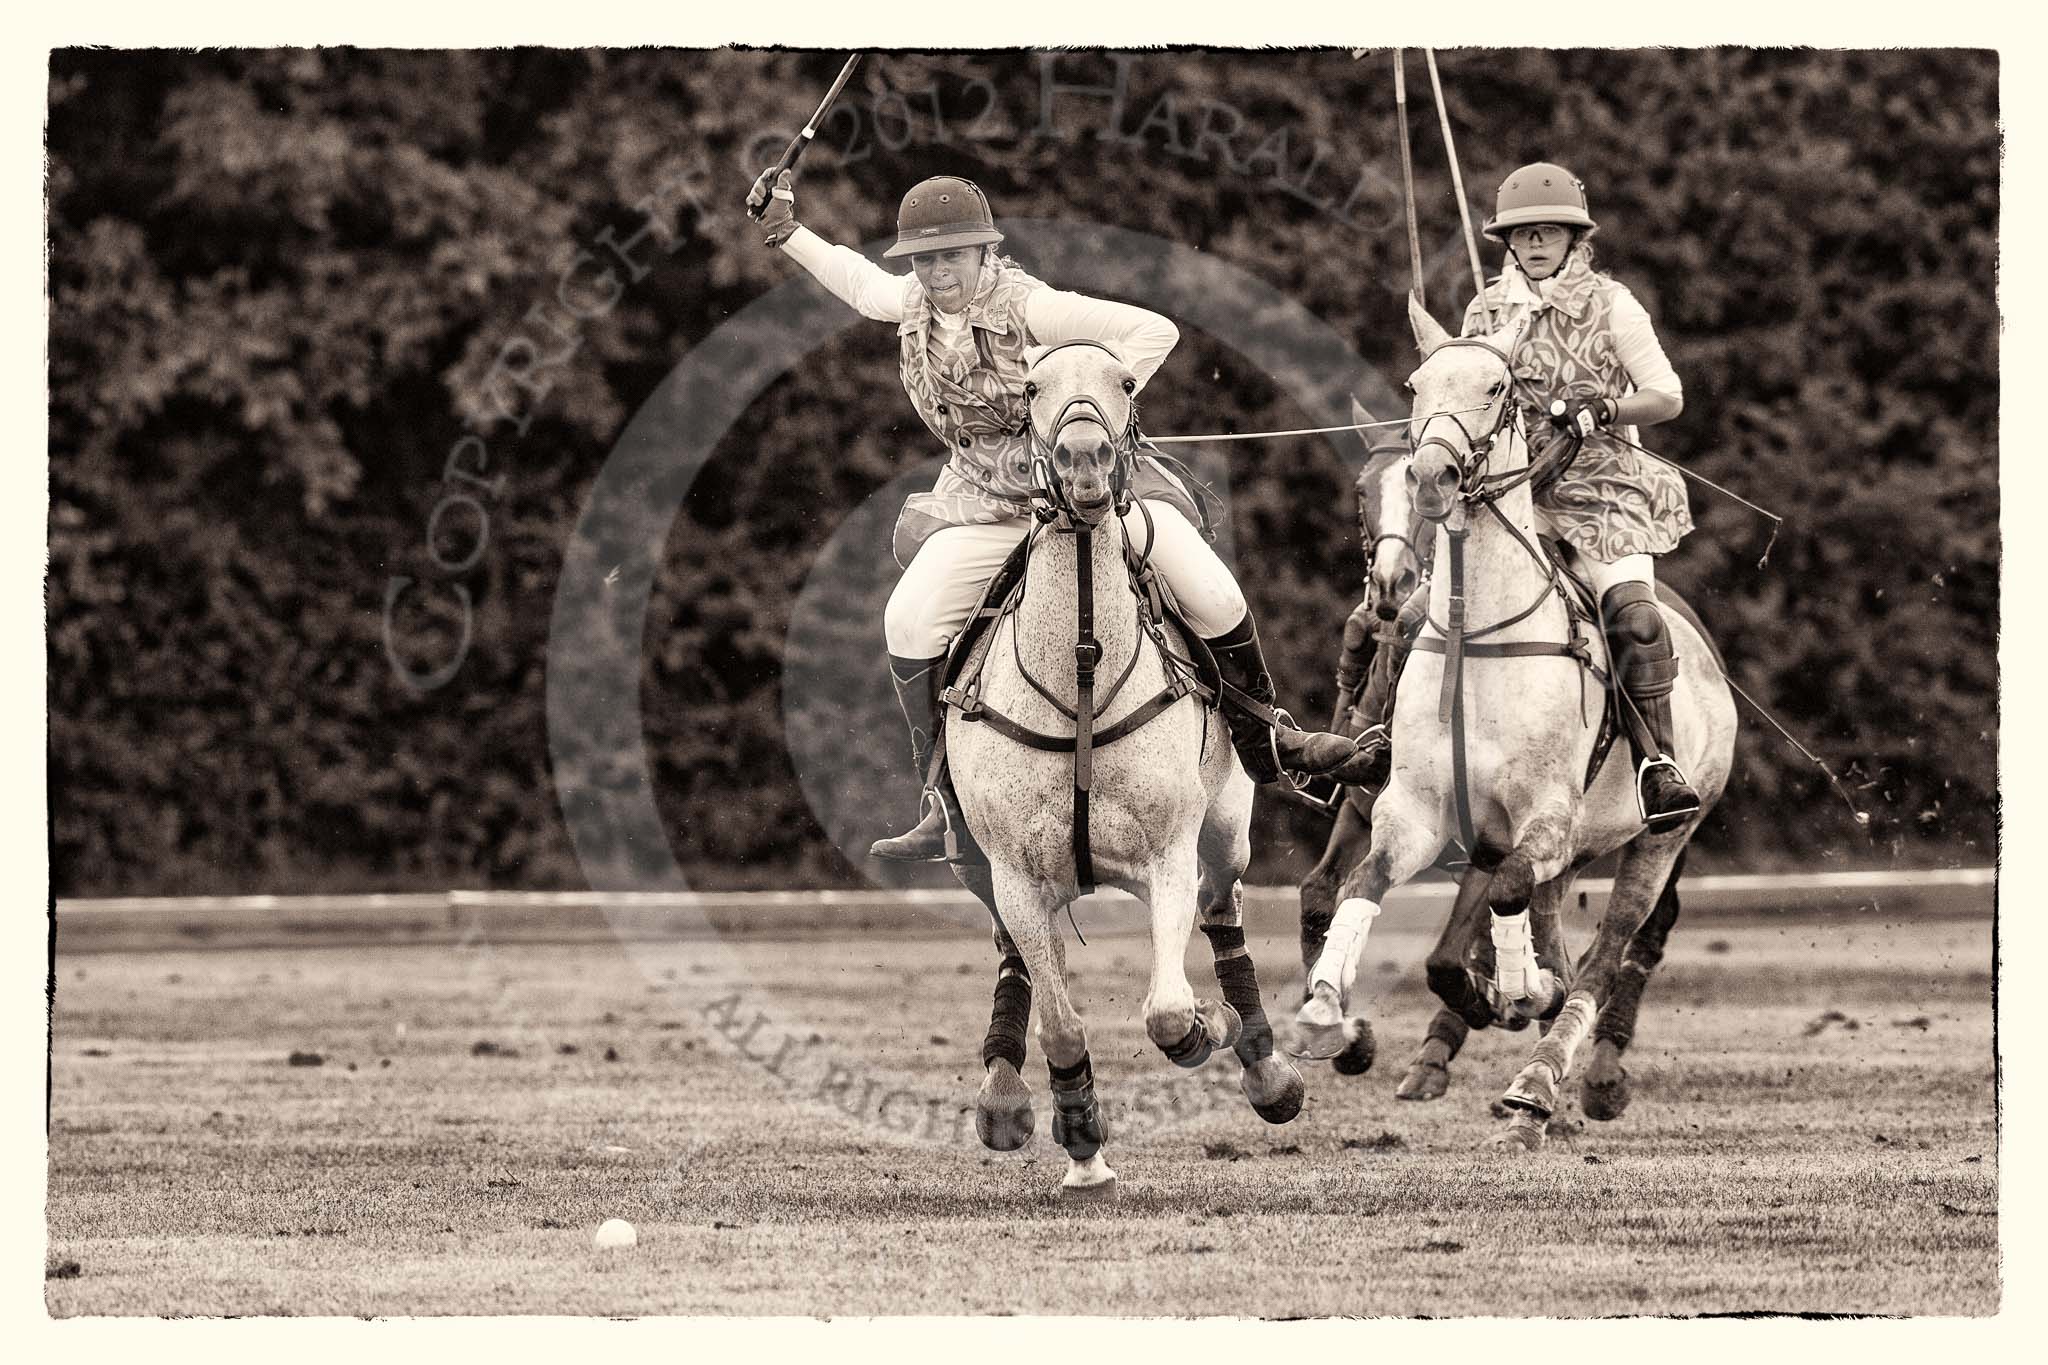 7th Heritage Polo Cup semi-finals: Changing direction - Barbara P Zingg..
Hurtwood Park Polo Club,
Ewhurst Green,
Surrey,
United Kingdom,
on 04 August 2012 at 13:14, image #113